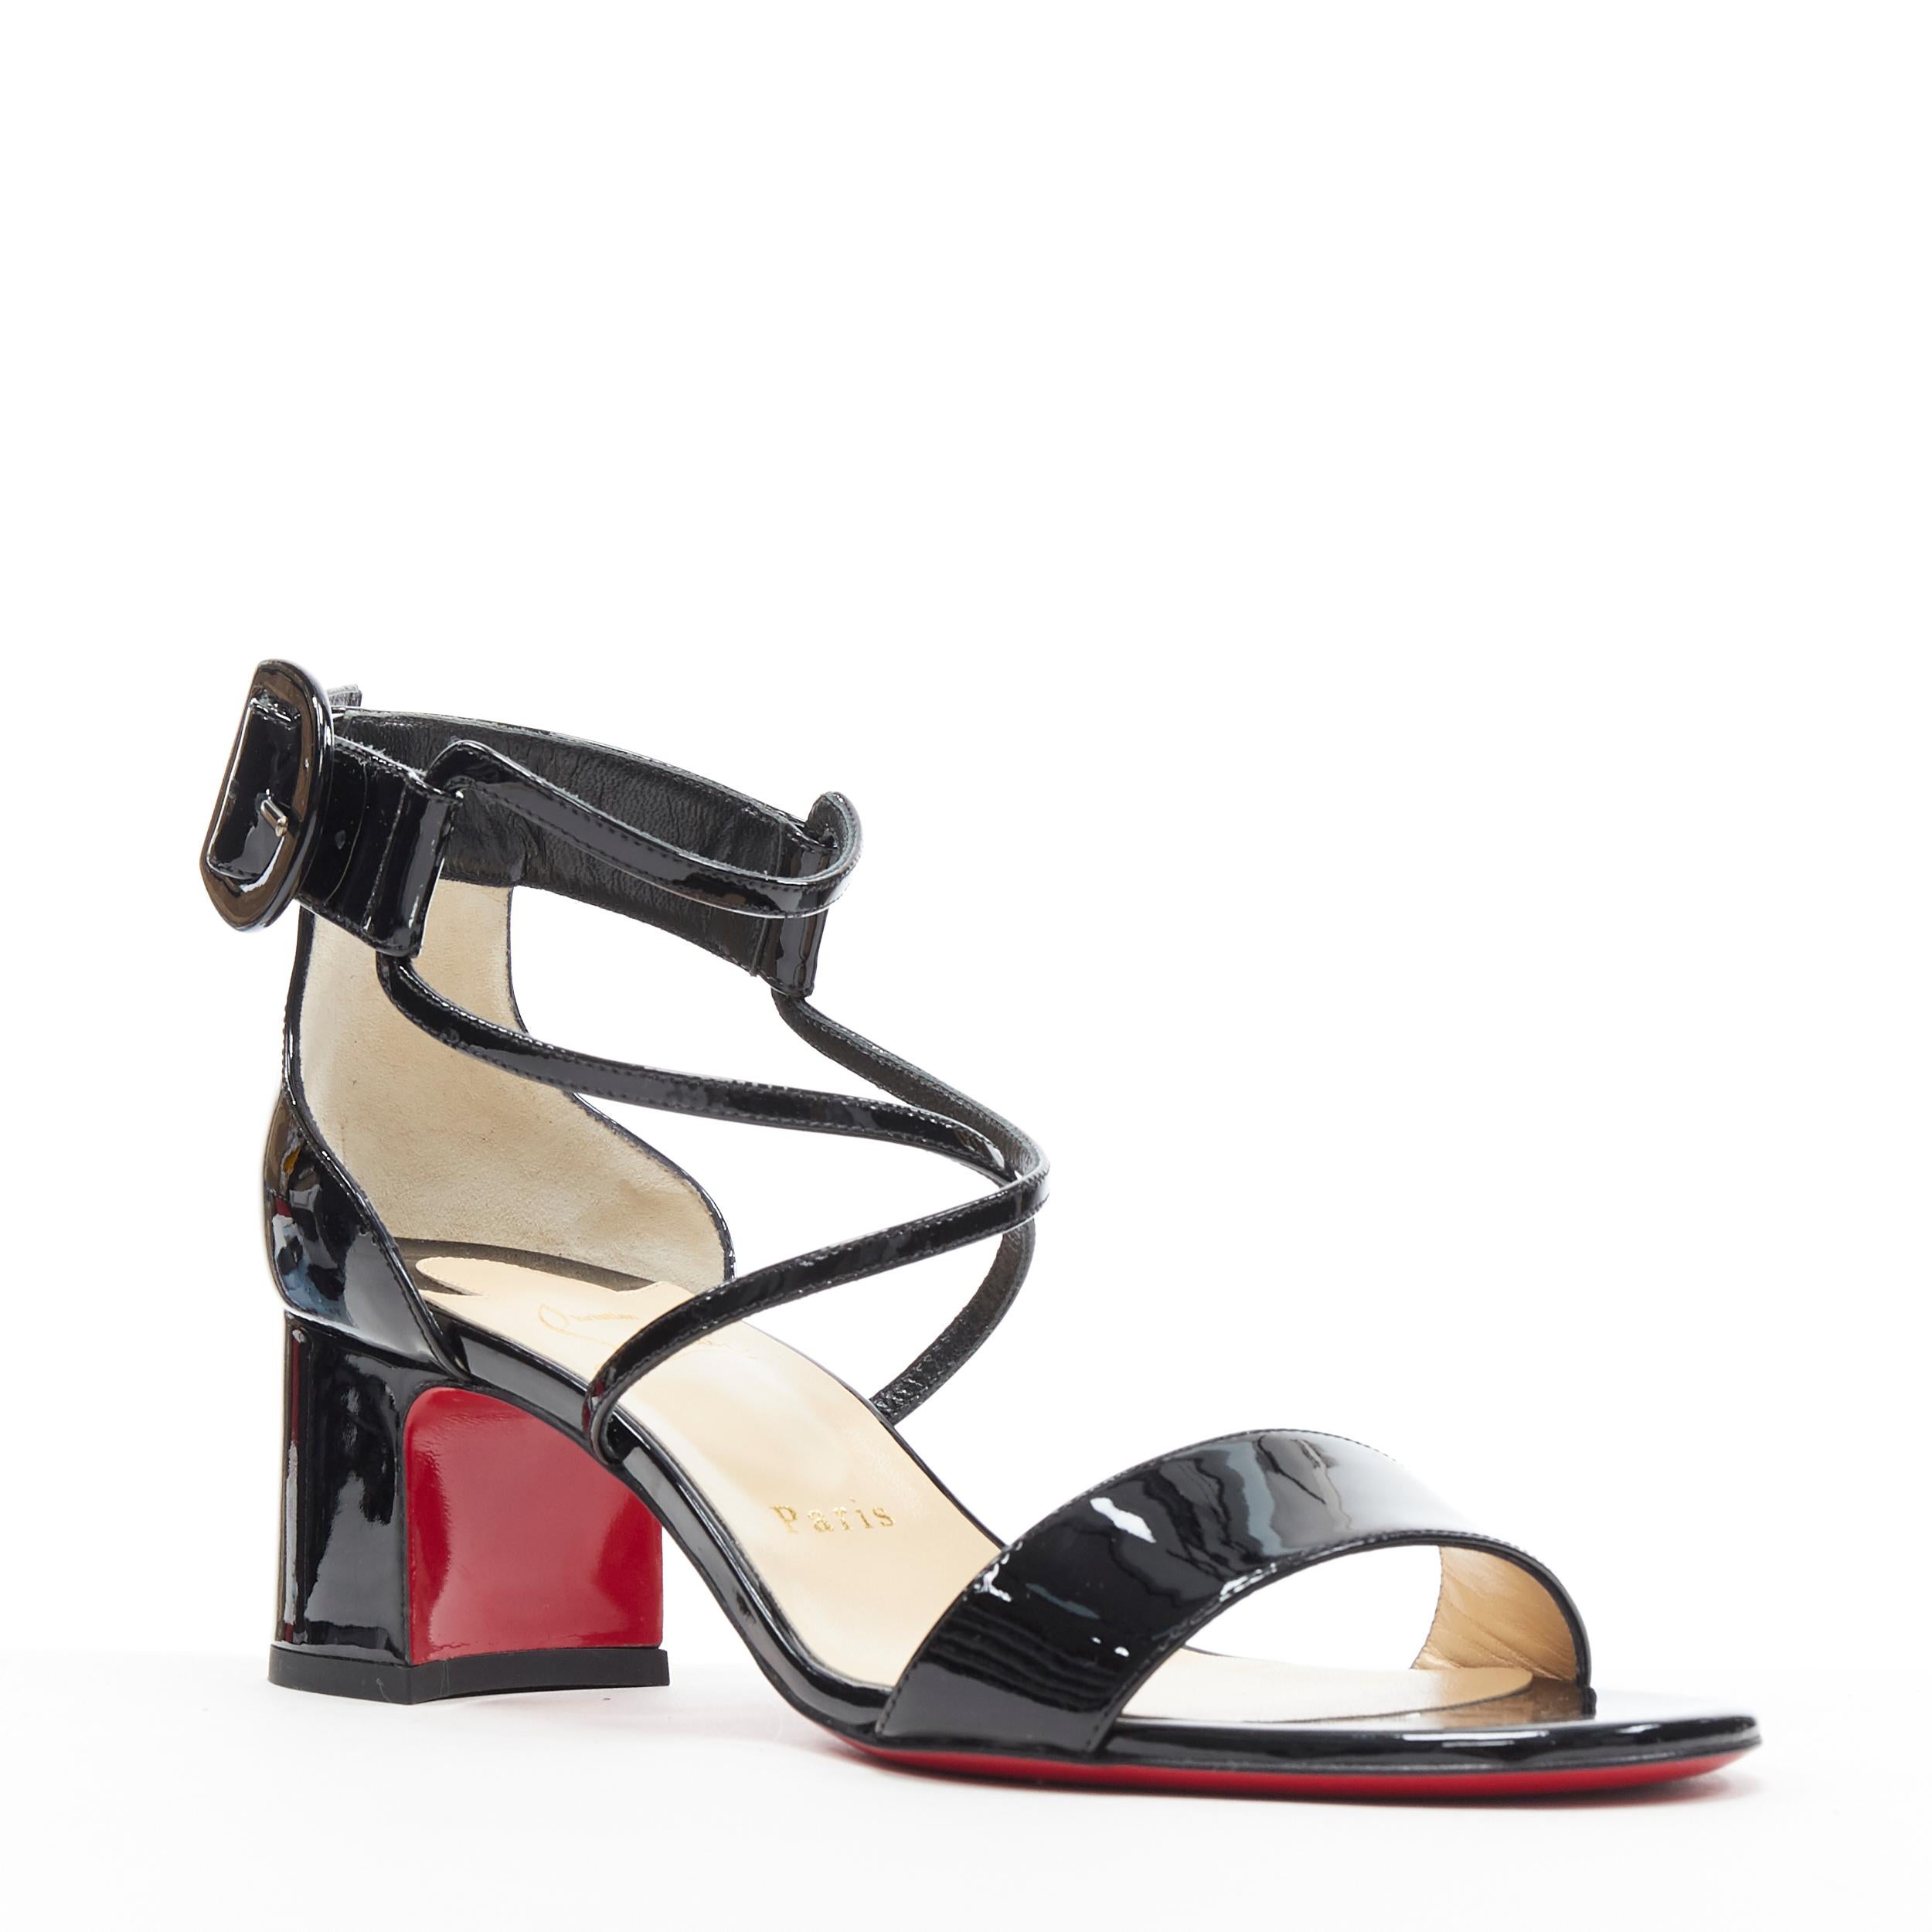 new CHRISTIAN LOUBOUTIN Choca 55 black patent strappy block heel sandal EU39.5
Brand: Christian Louboutin
Designer: Christian Louboutin
Model Name / Style: Choca 55
Material: Patent leather
Color: Black
Pattern: Solid
Closure: Buckle
Extra Detail: